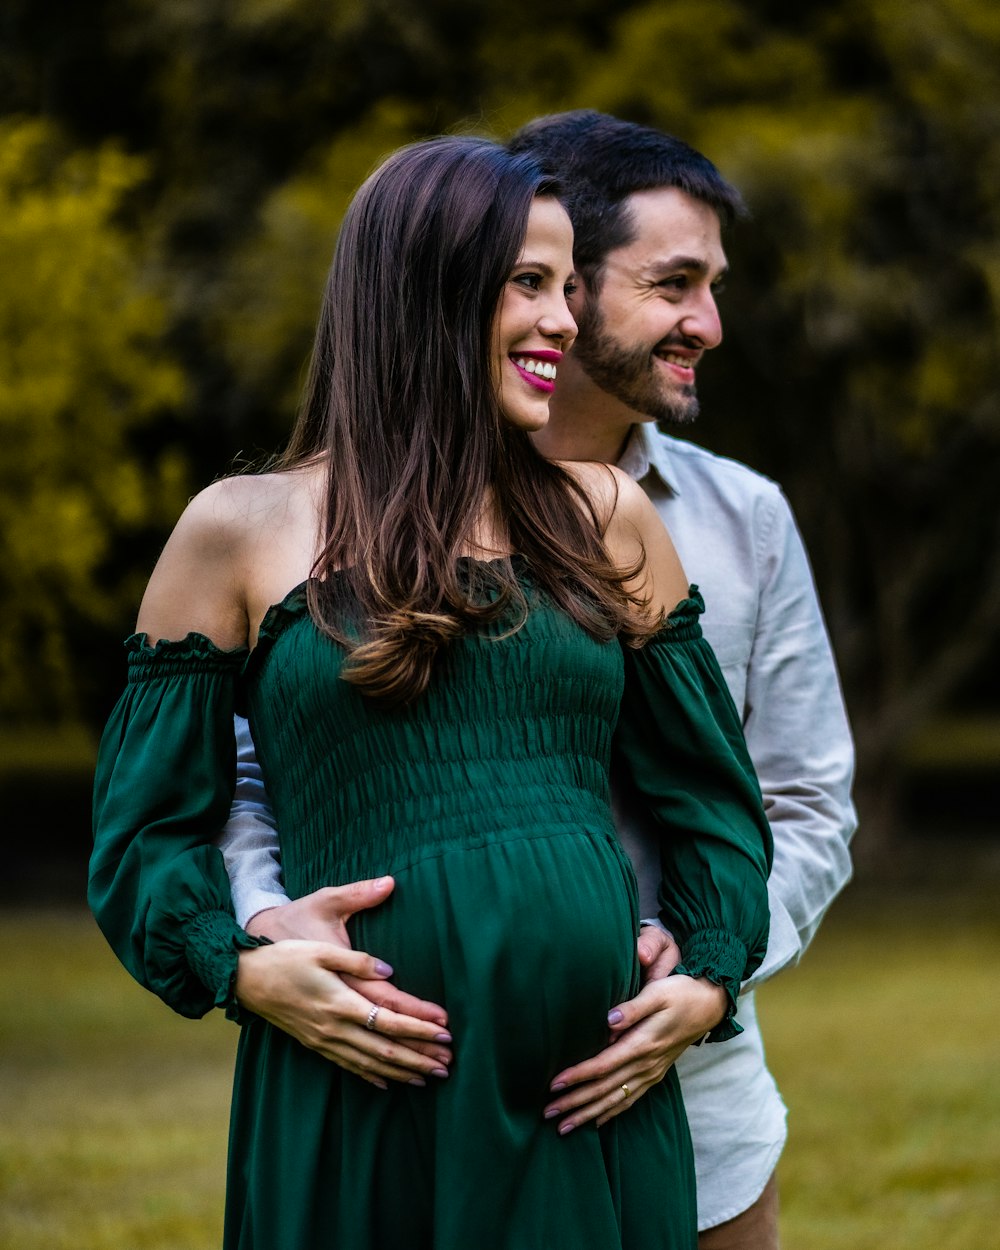 a pregnant woman in a green dress standing next to a man